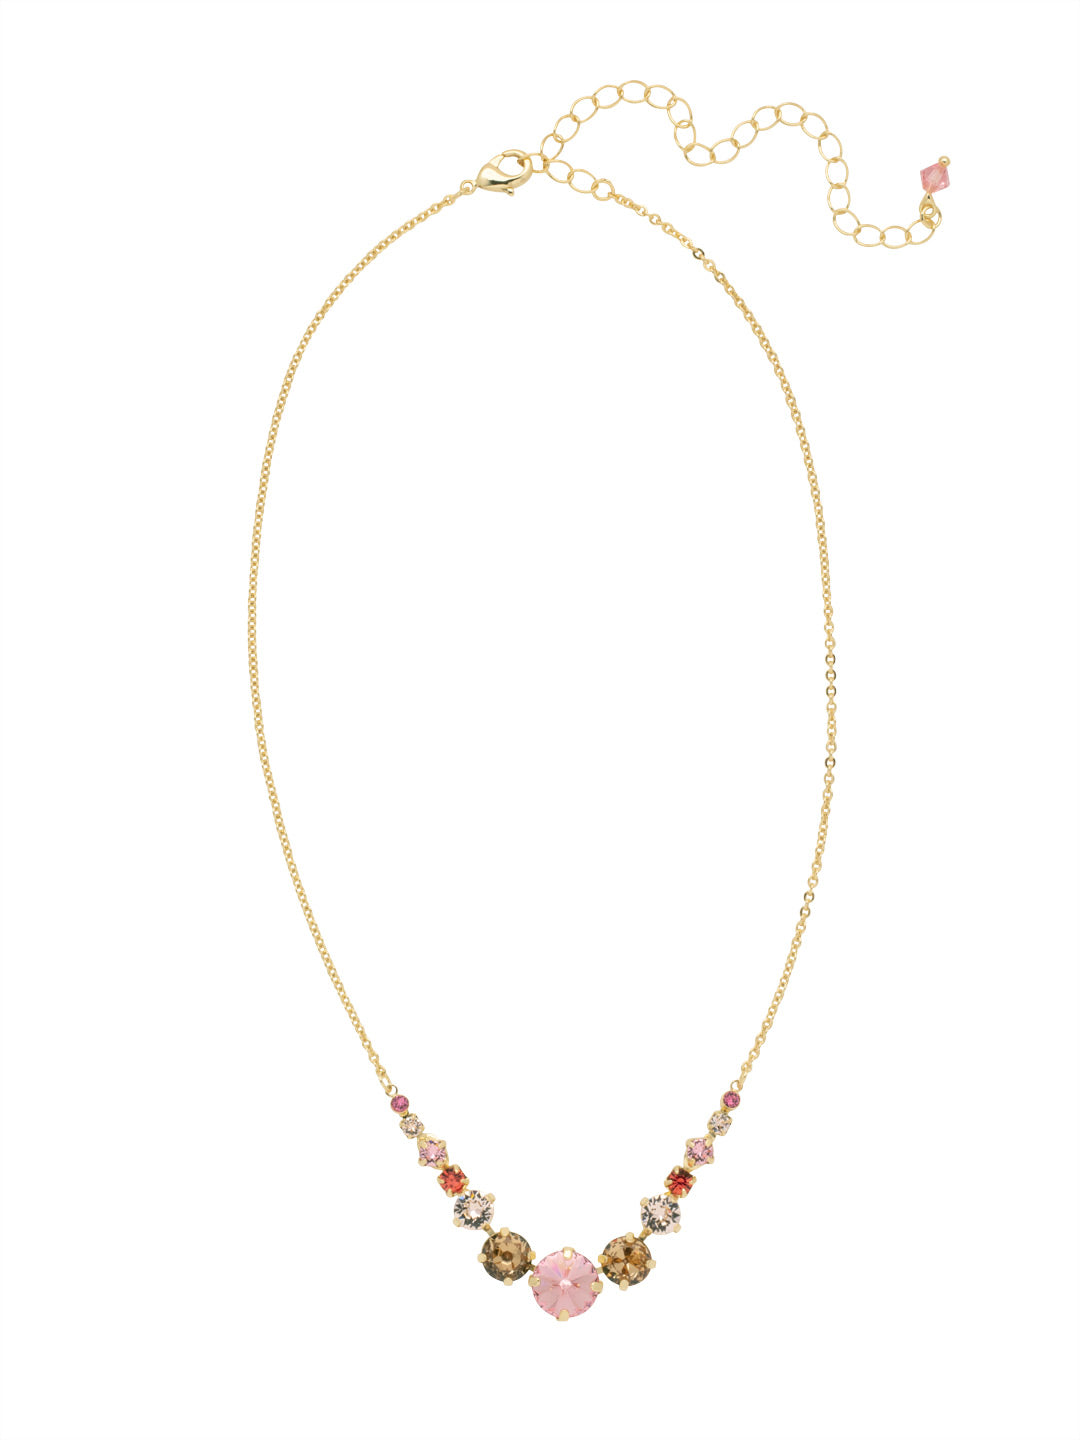 London Tennis Necklace - NCQ14BGFSK - <p>A long, simple chain paired with gorgeous round stones is exactly what every girl needs to dress things up. This round stone necklace is perfect for layering, or to just wear alone. Let the simple sparkle take over. From Sorrelli's First Kiss collection in our Bright Gold-tone finish.</p>